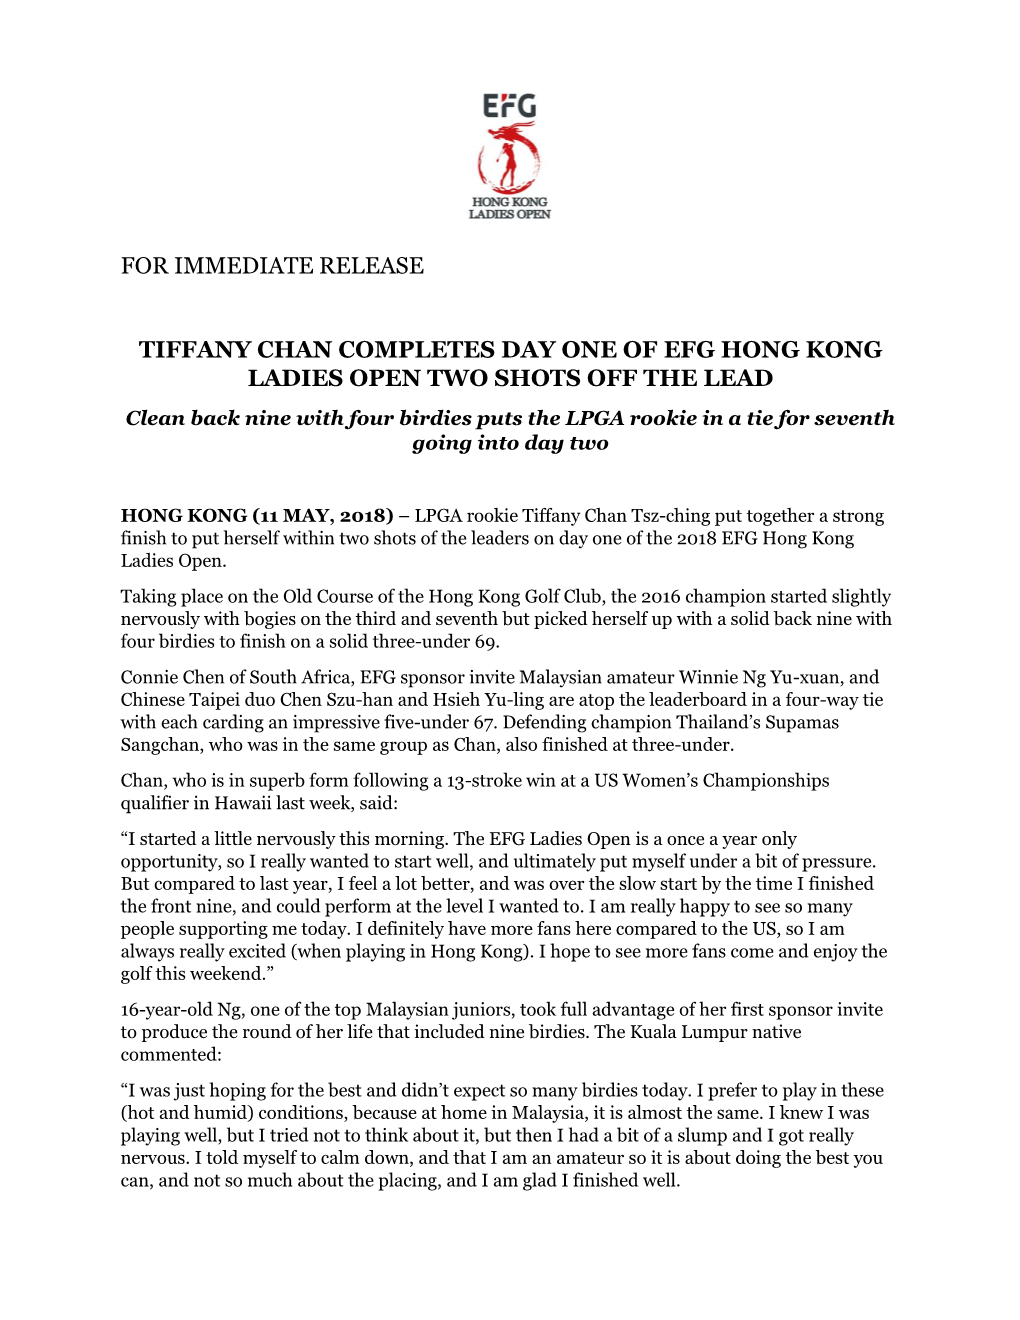 For Immediate Release Tiffany Chan Completes Day One of Efg Hong